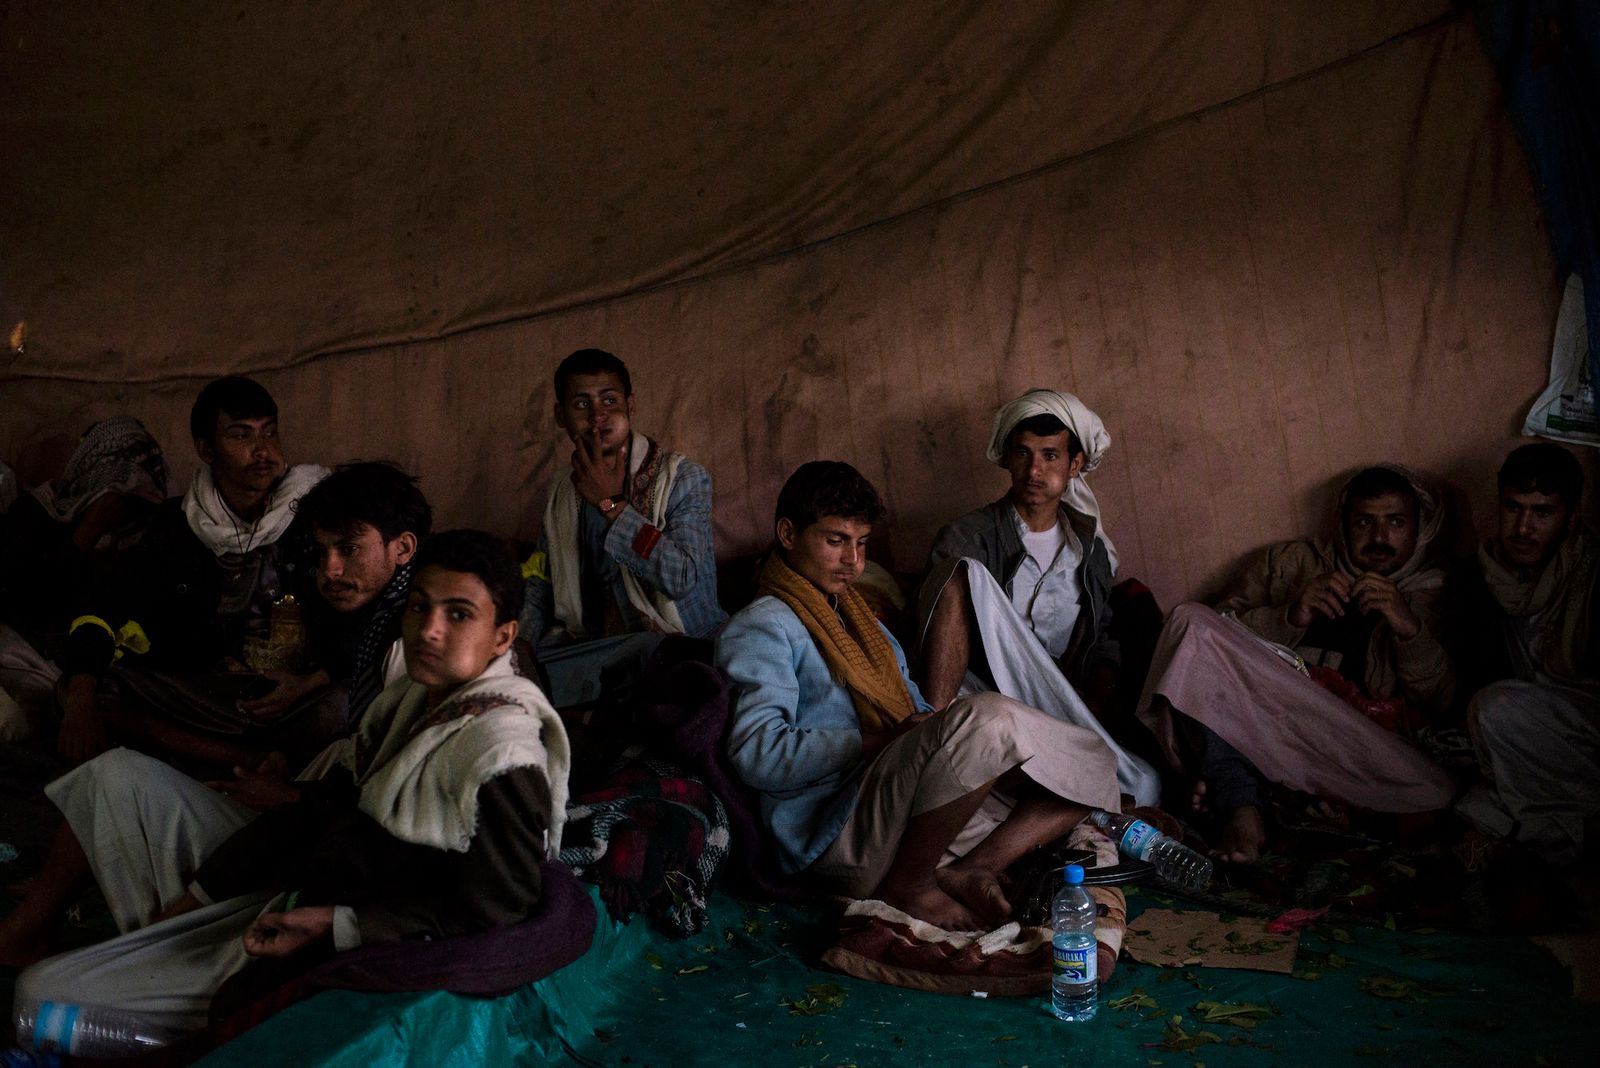 © Alex Potter - Yemeni men from the countryside attend a sit-in prior to the Houthi takeover and coup in Sana'a.